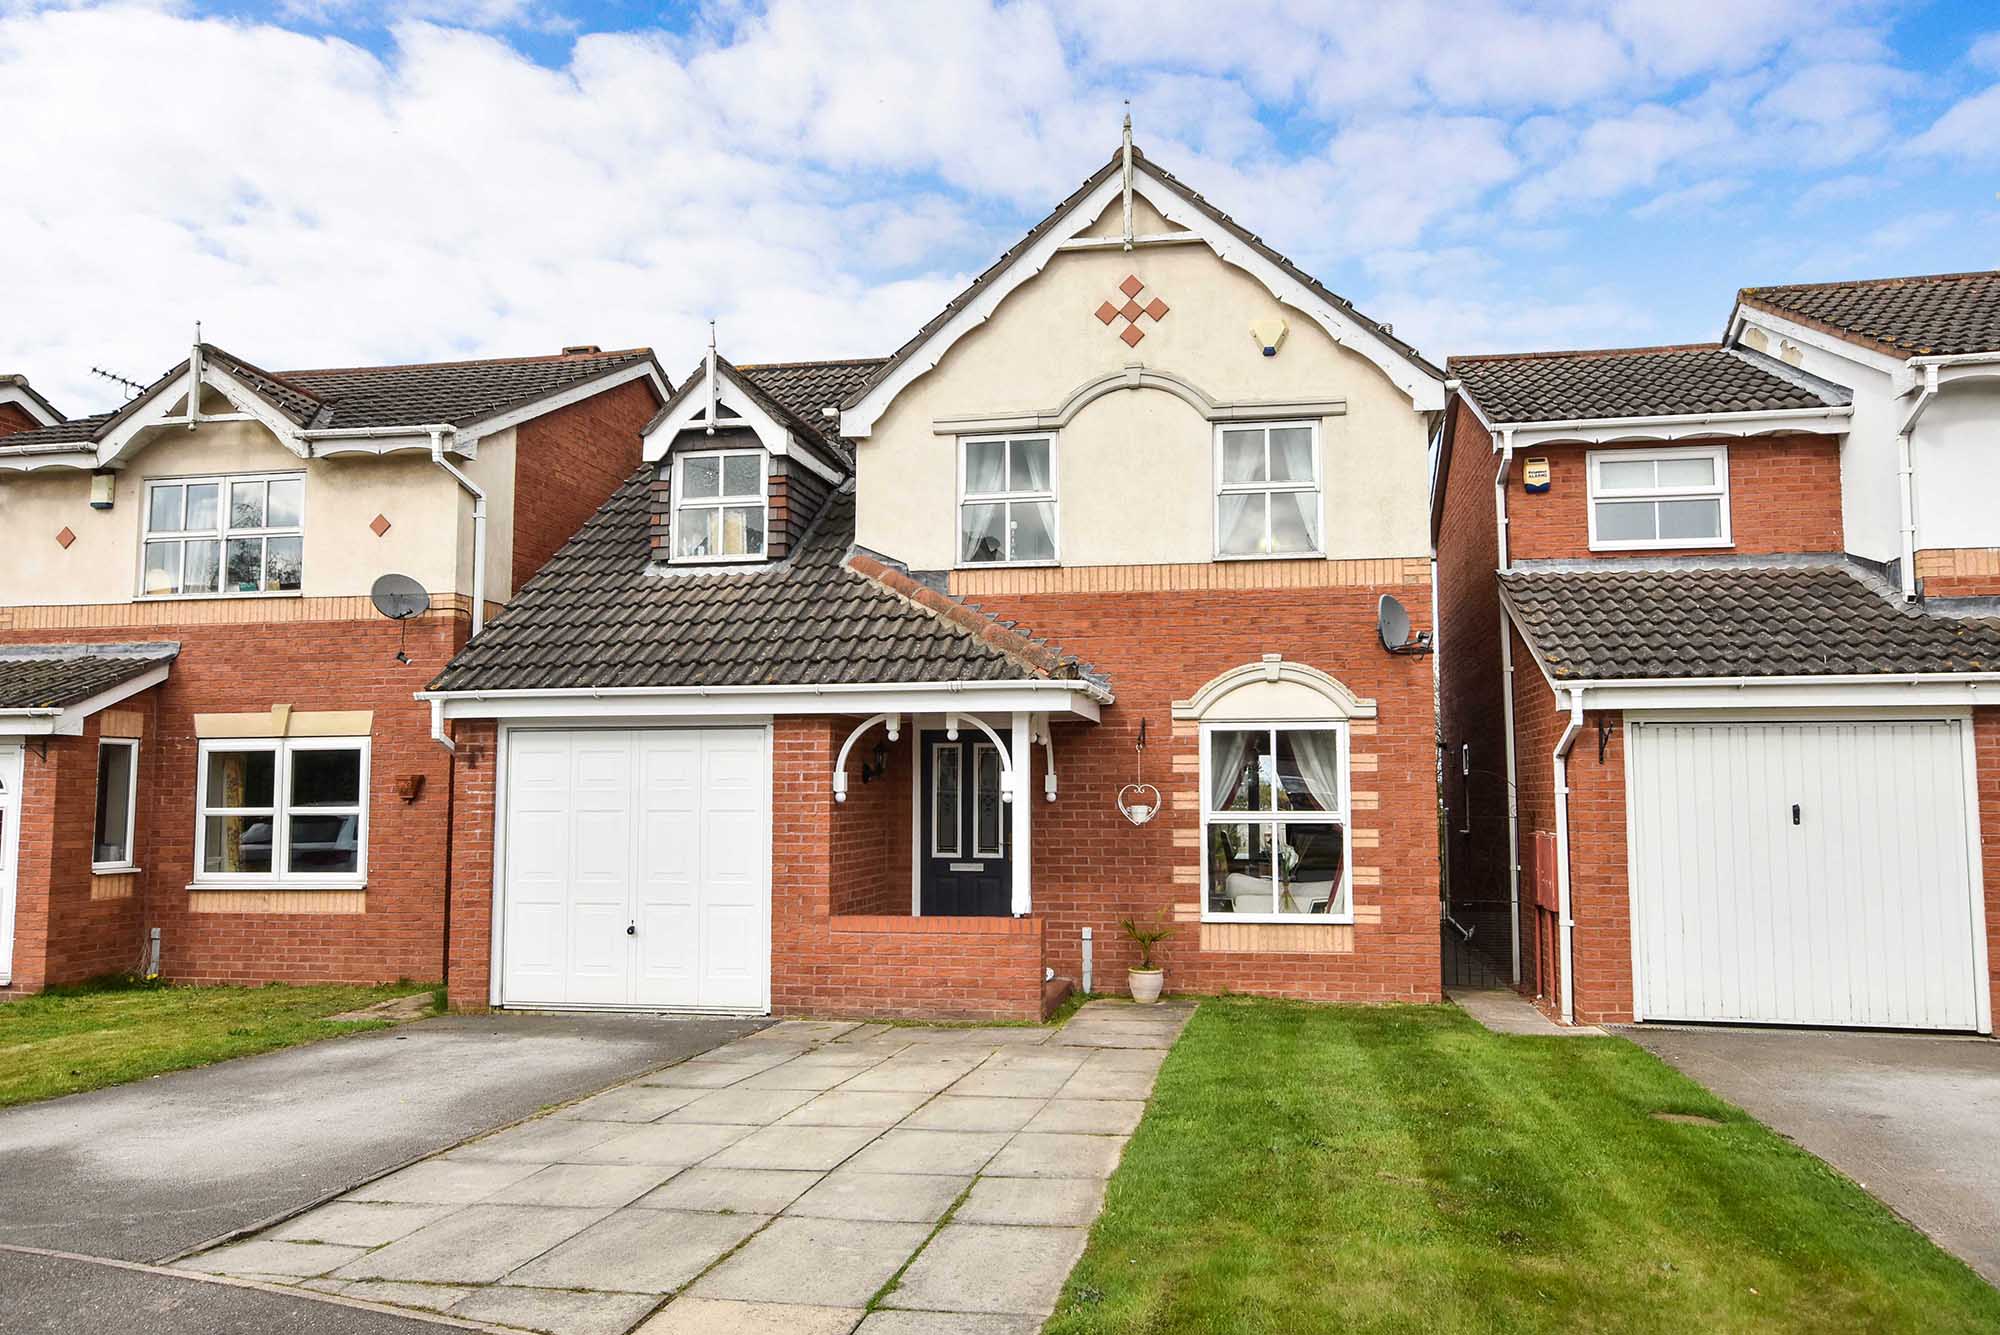 Severn Green: York's most desirable homes for sale right now